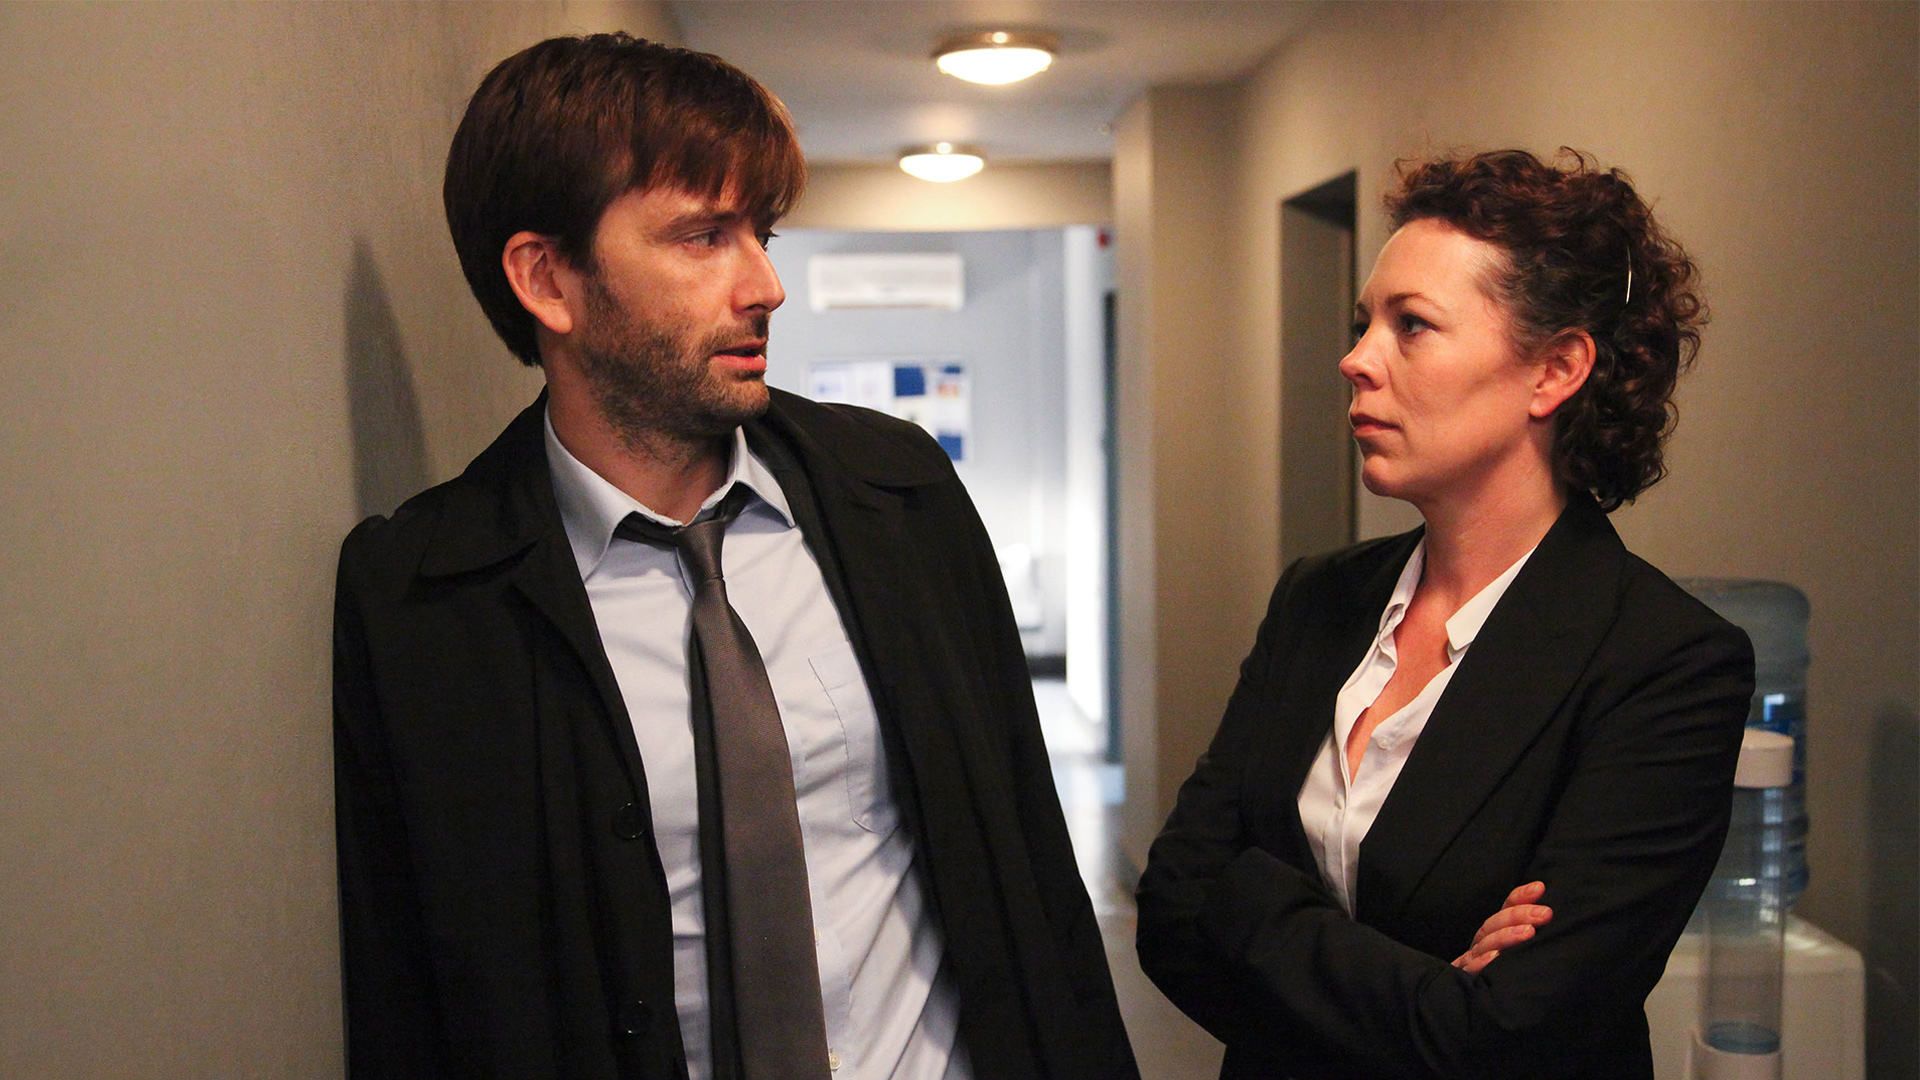 Detectives - BROADCHURCH "Episode Three"